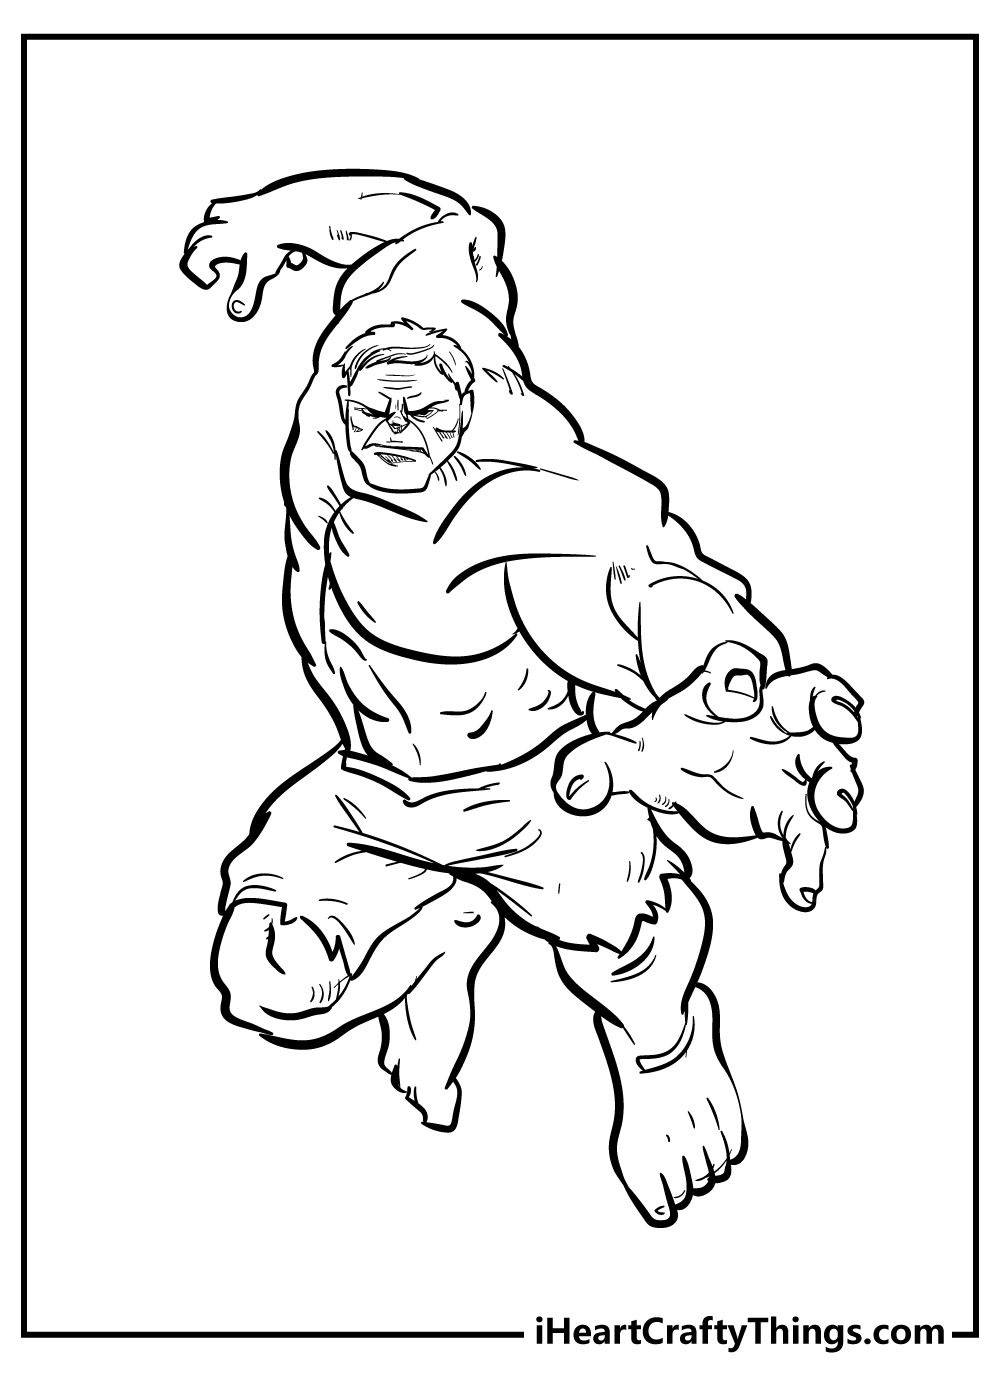 hulk coloring book for adults